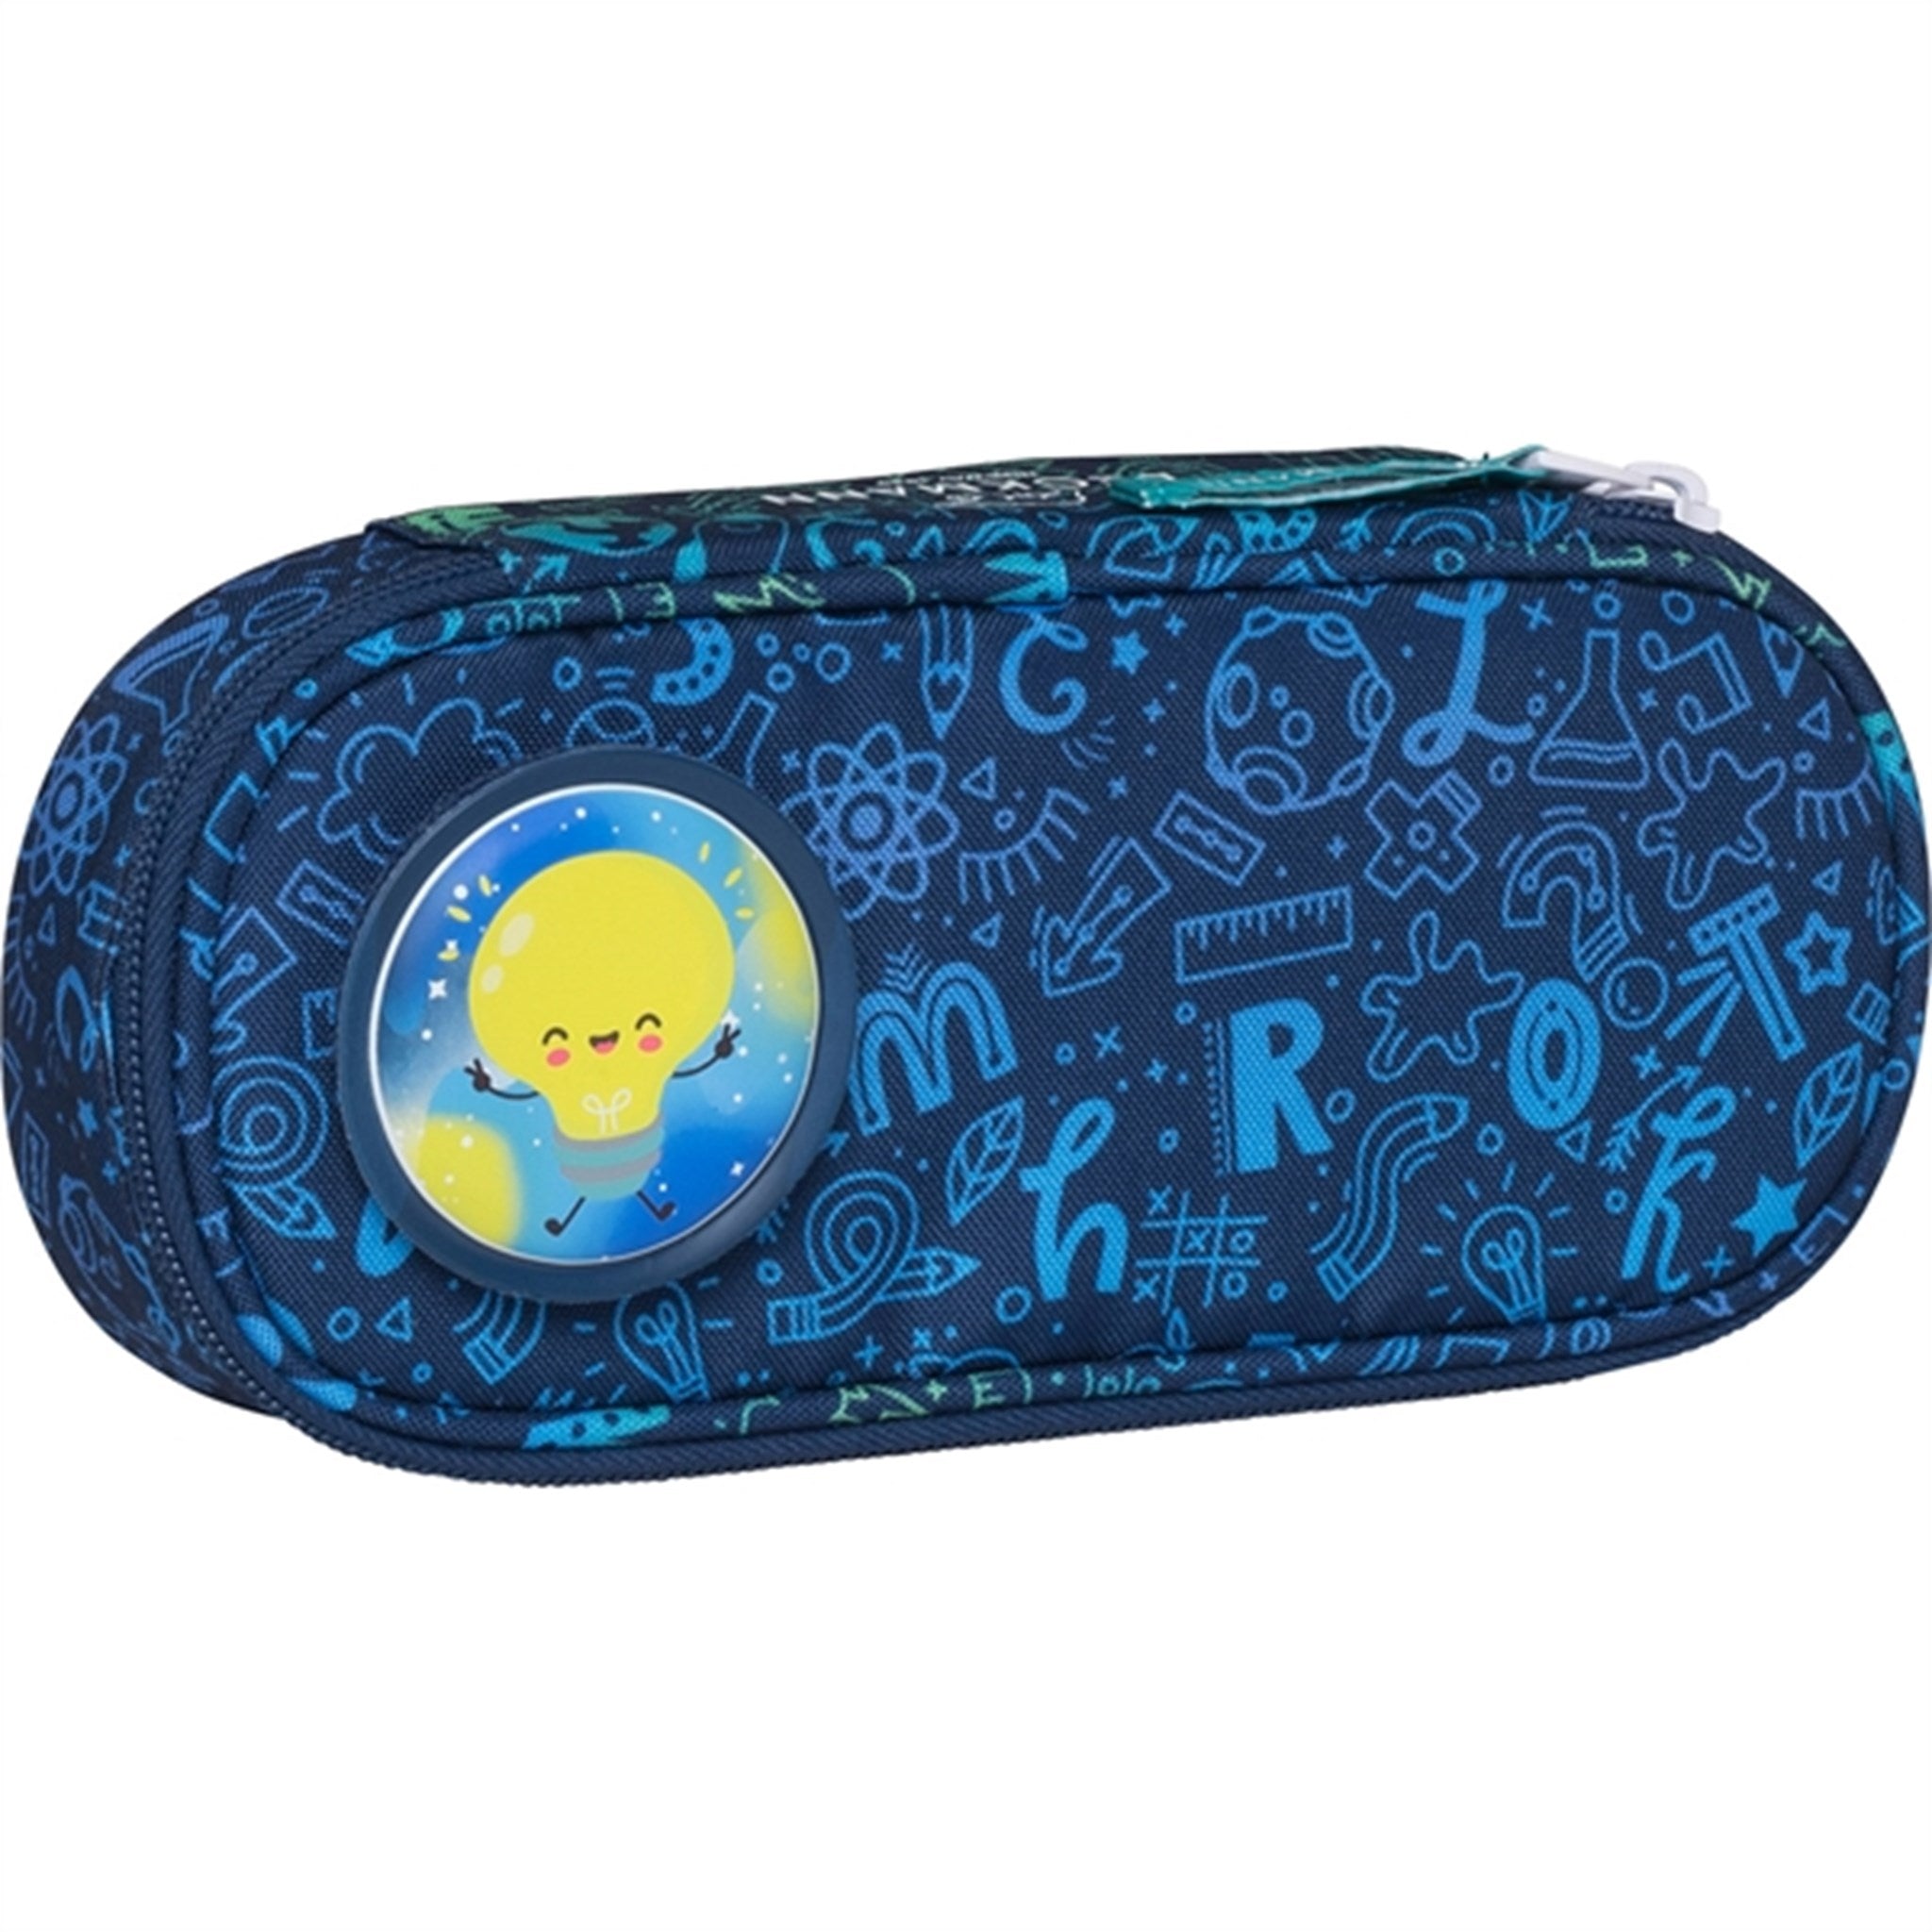 Beckmann Oval Pencil Case Science